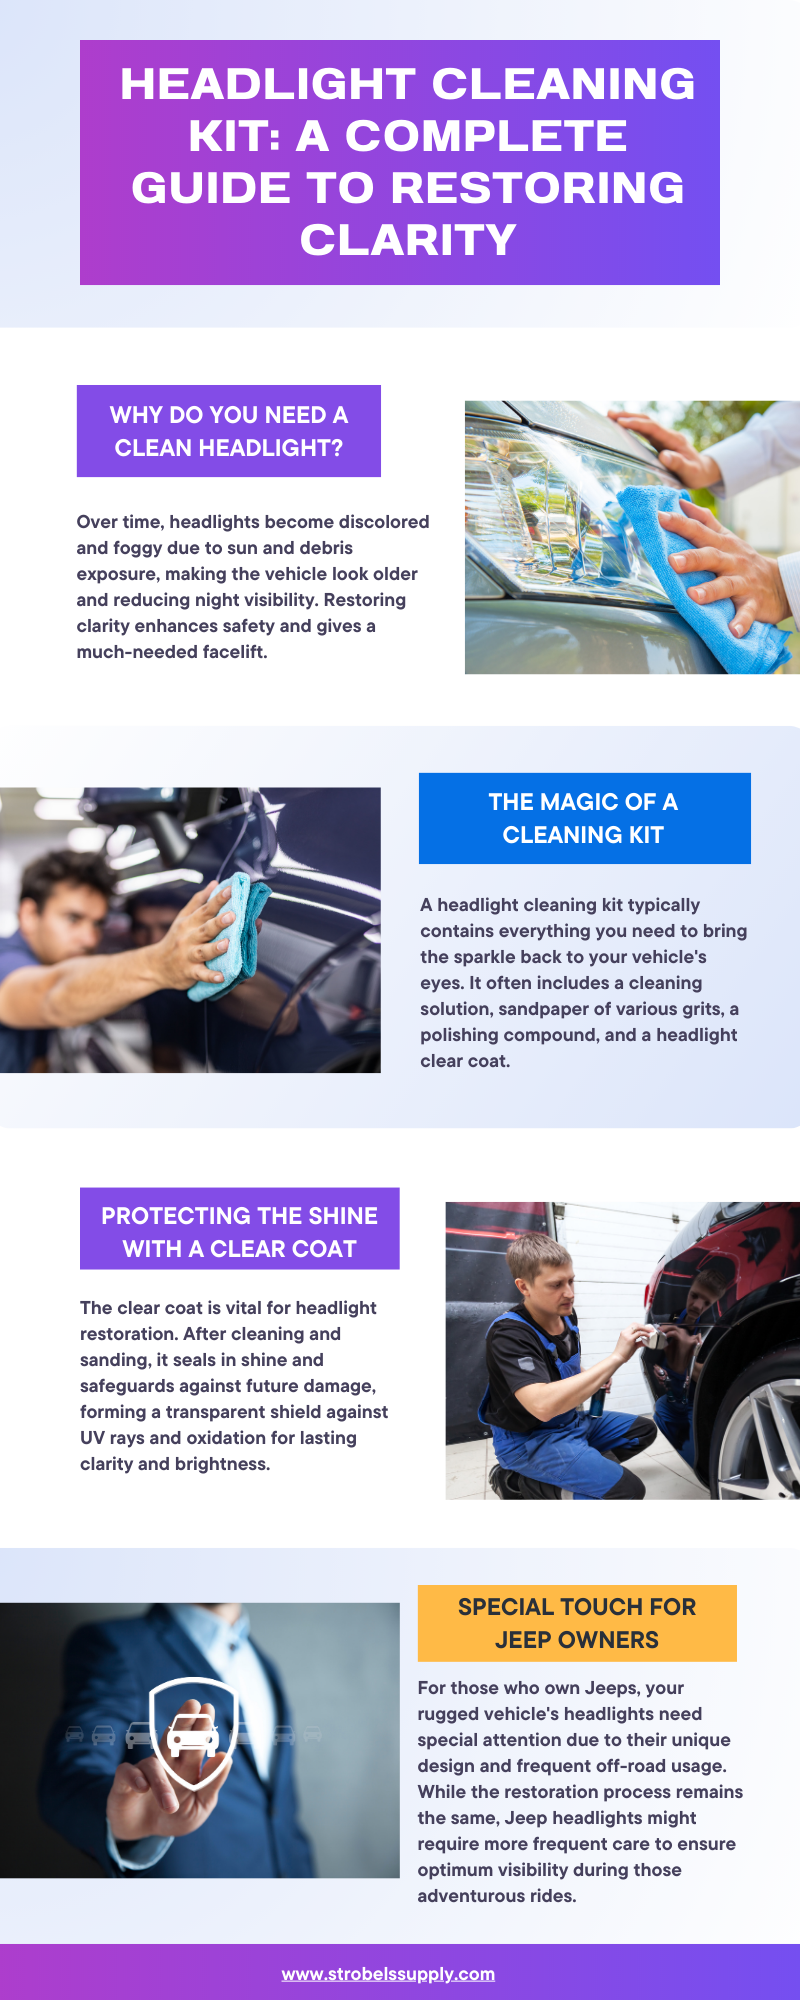 Headlight Cleaning Kit: A Complete Guide to Restoring Clarity - imagem.app